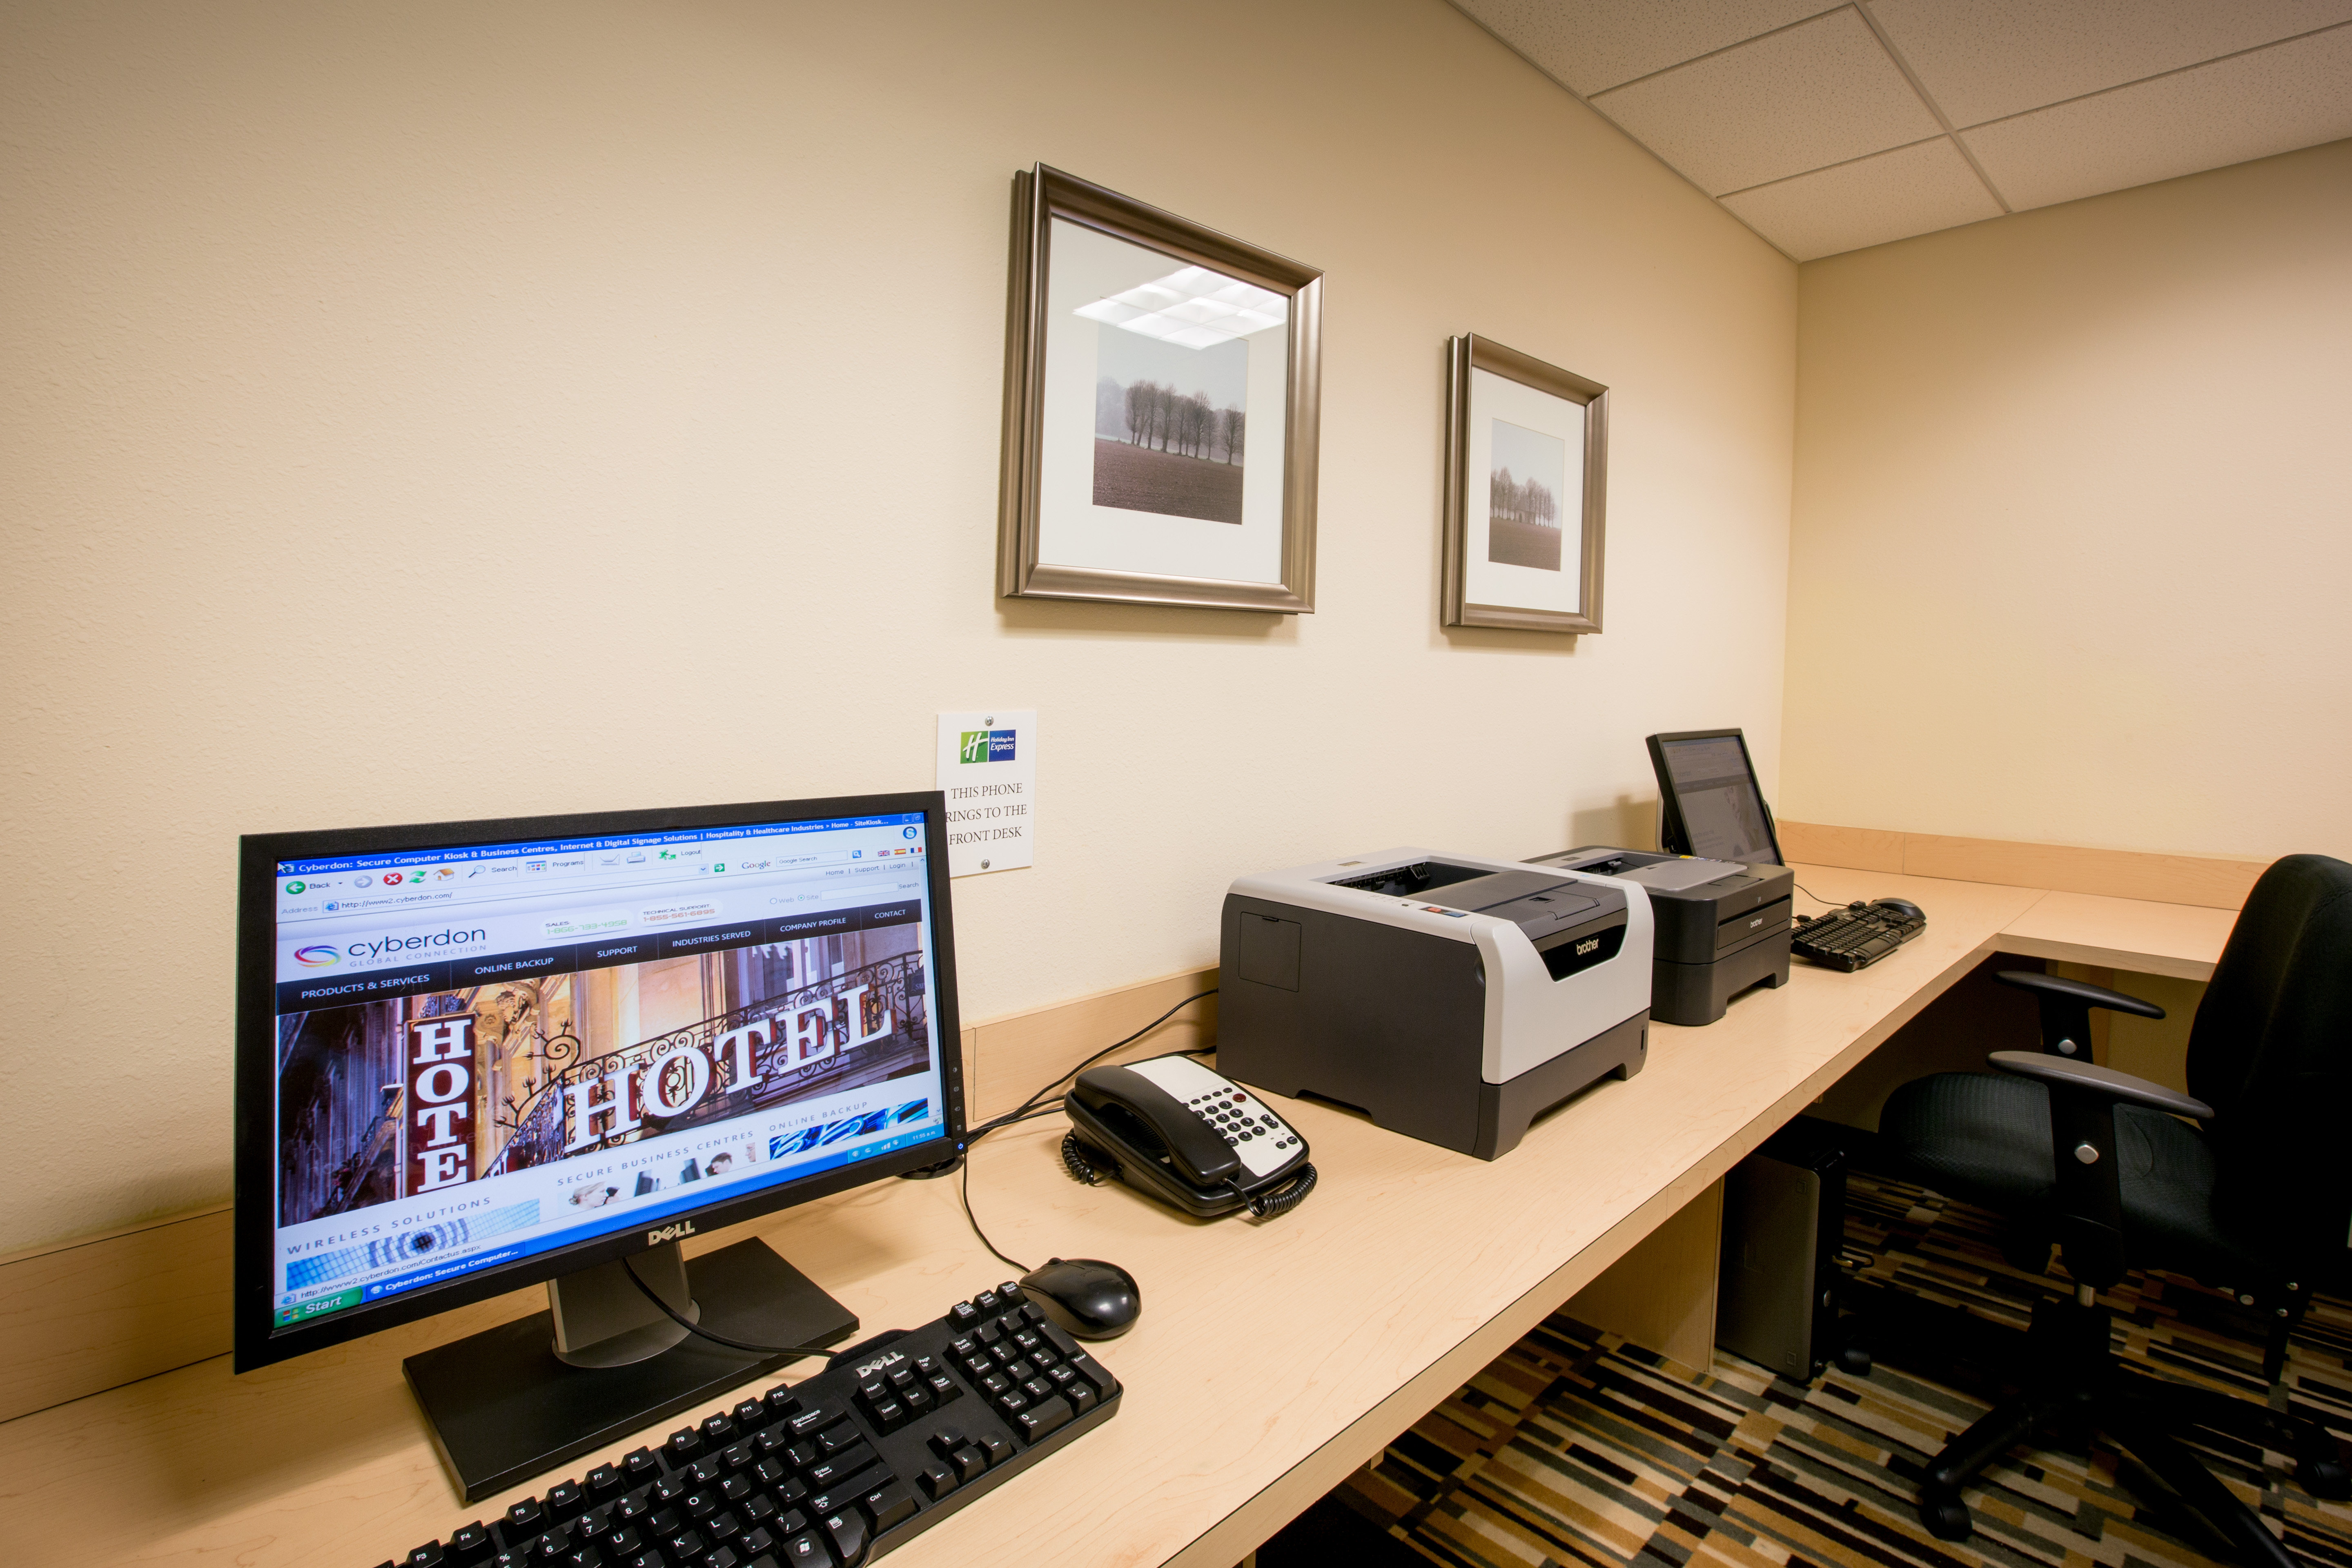 Stay Connected in our complimentary Business Center